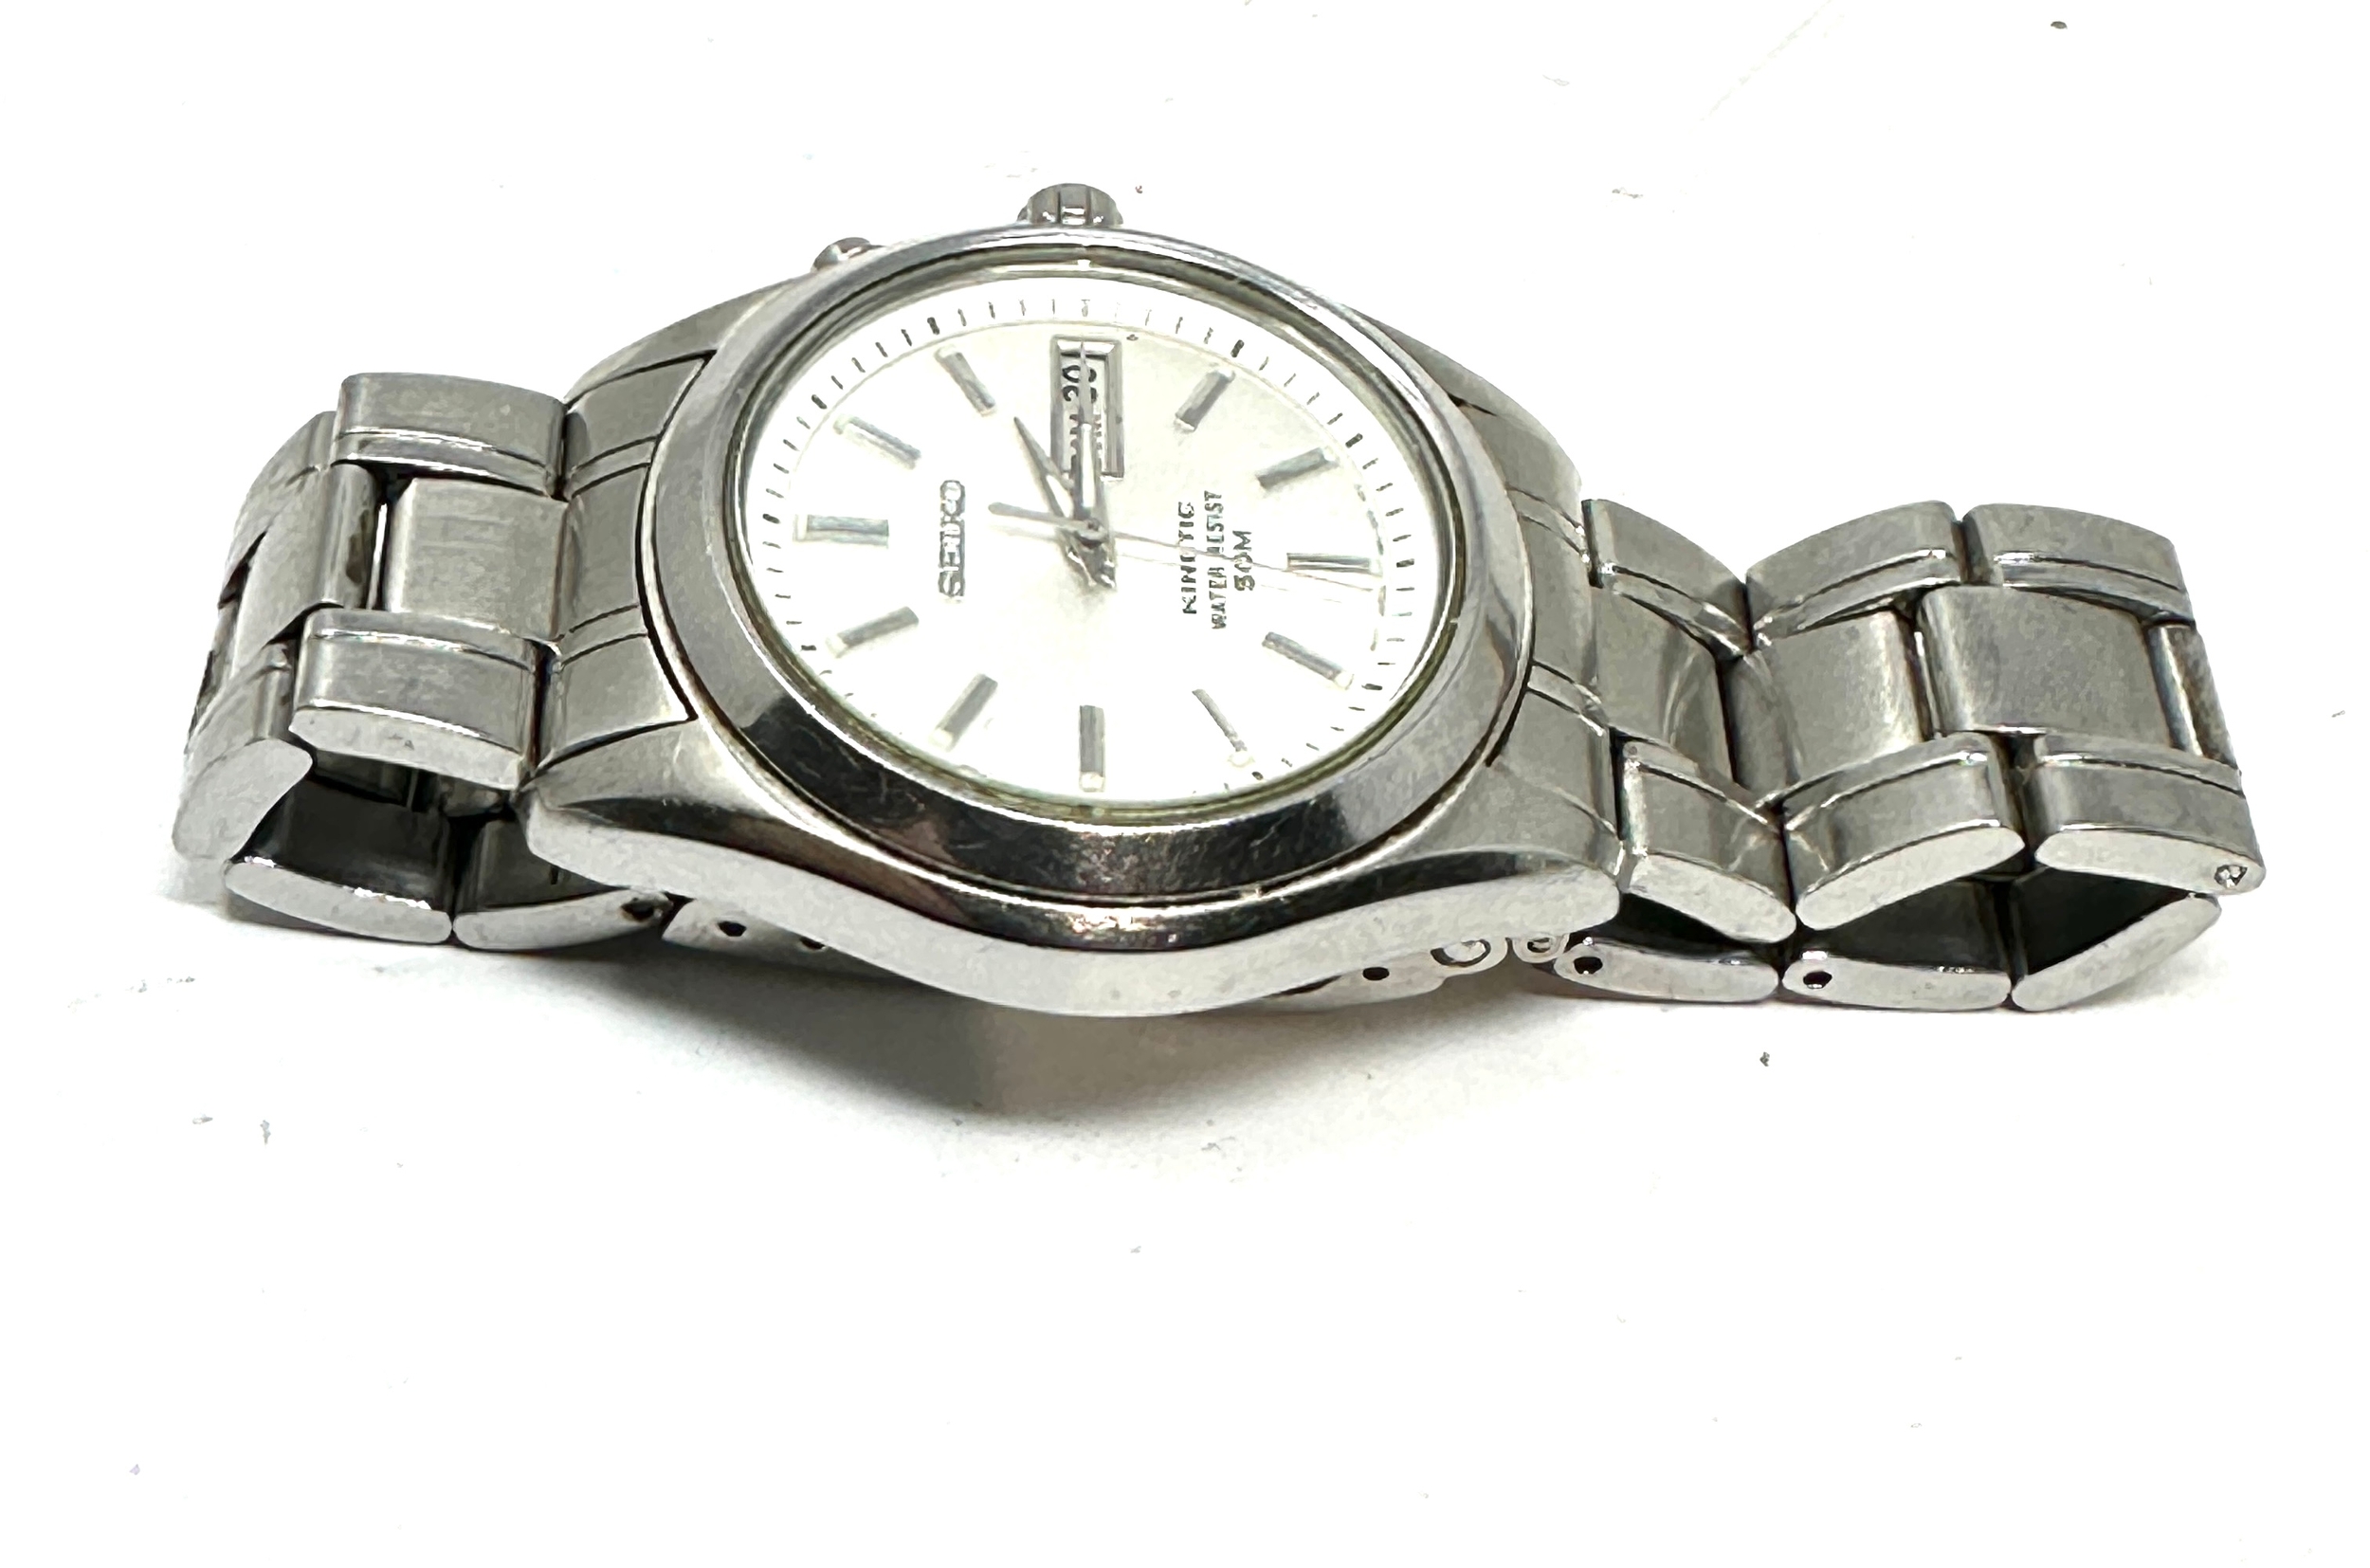 Gents Seiko Kinetic Watch 5M63-0B90 - 50m the watch is ticking - Image 4 of 6